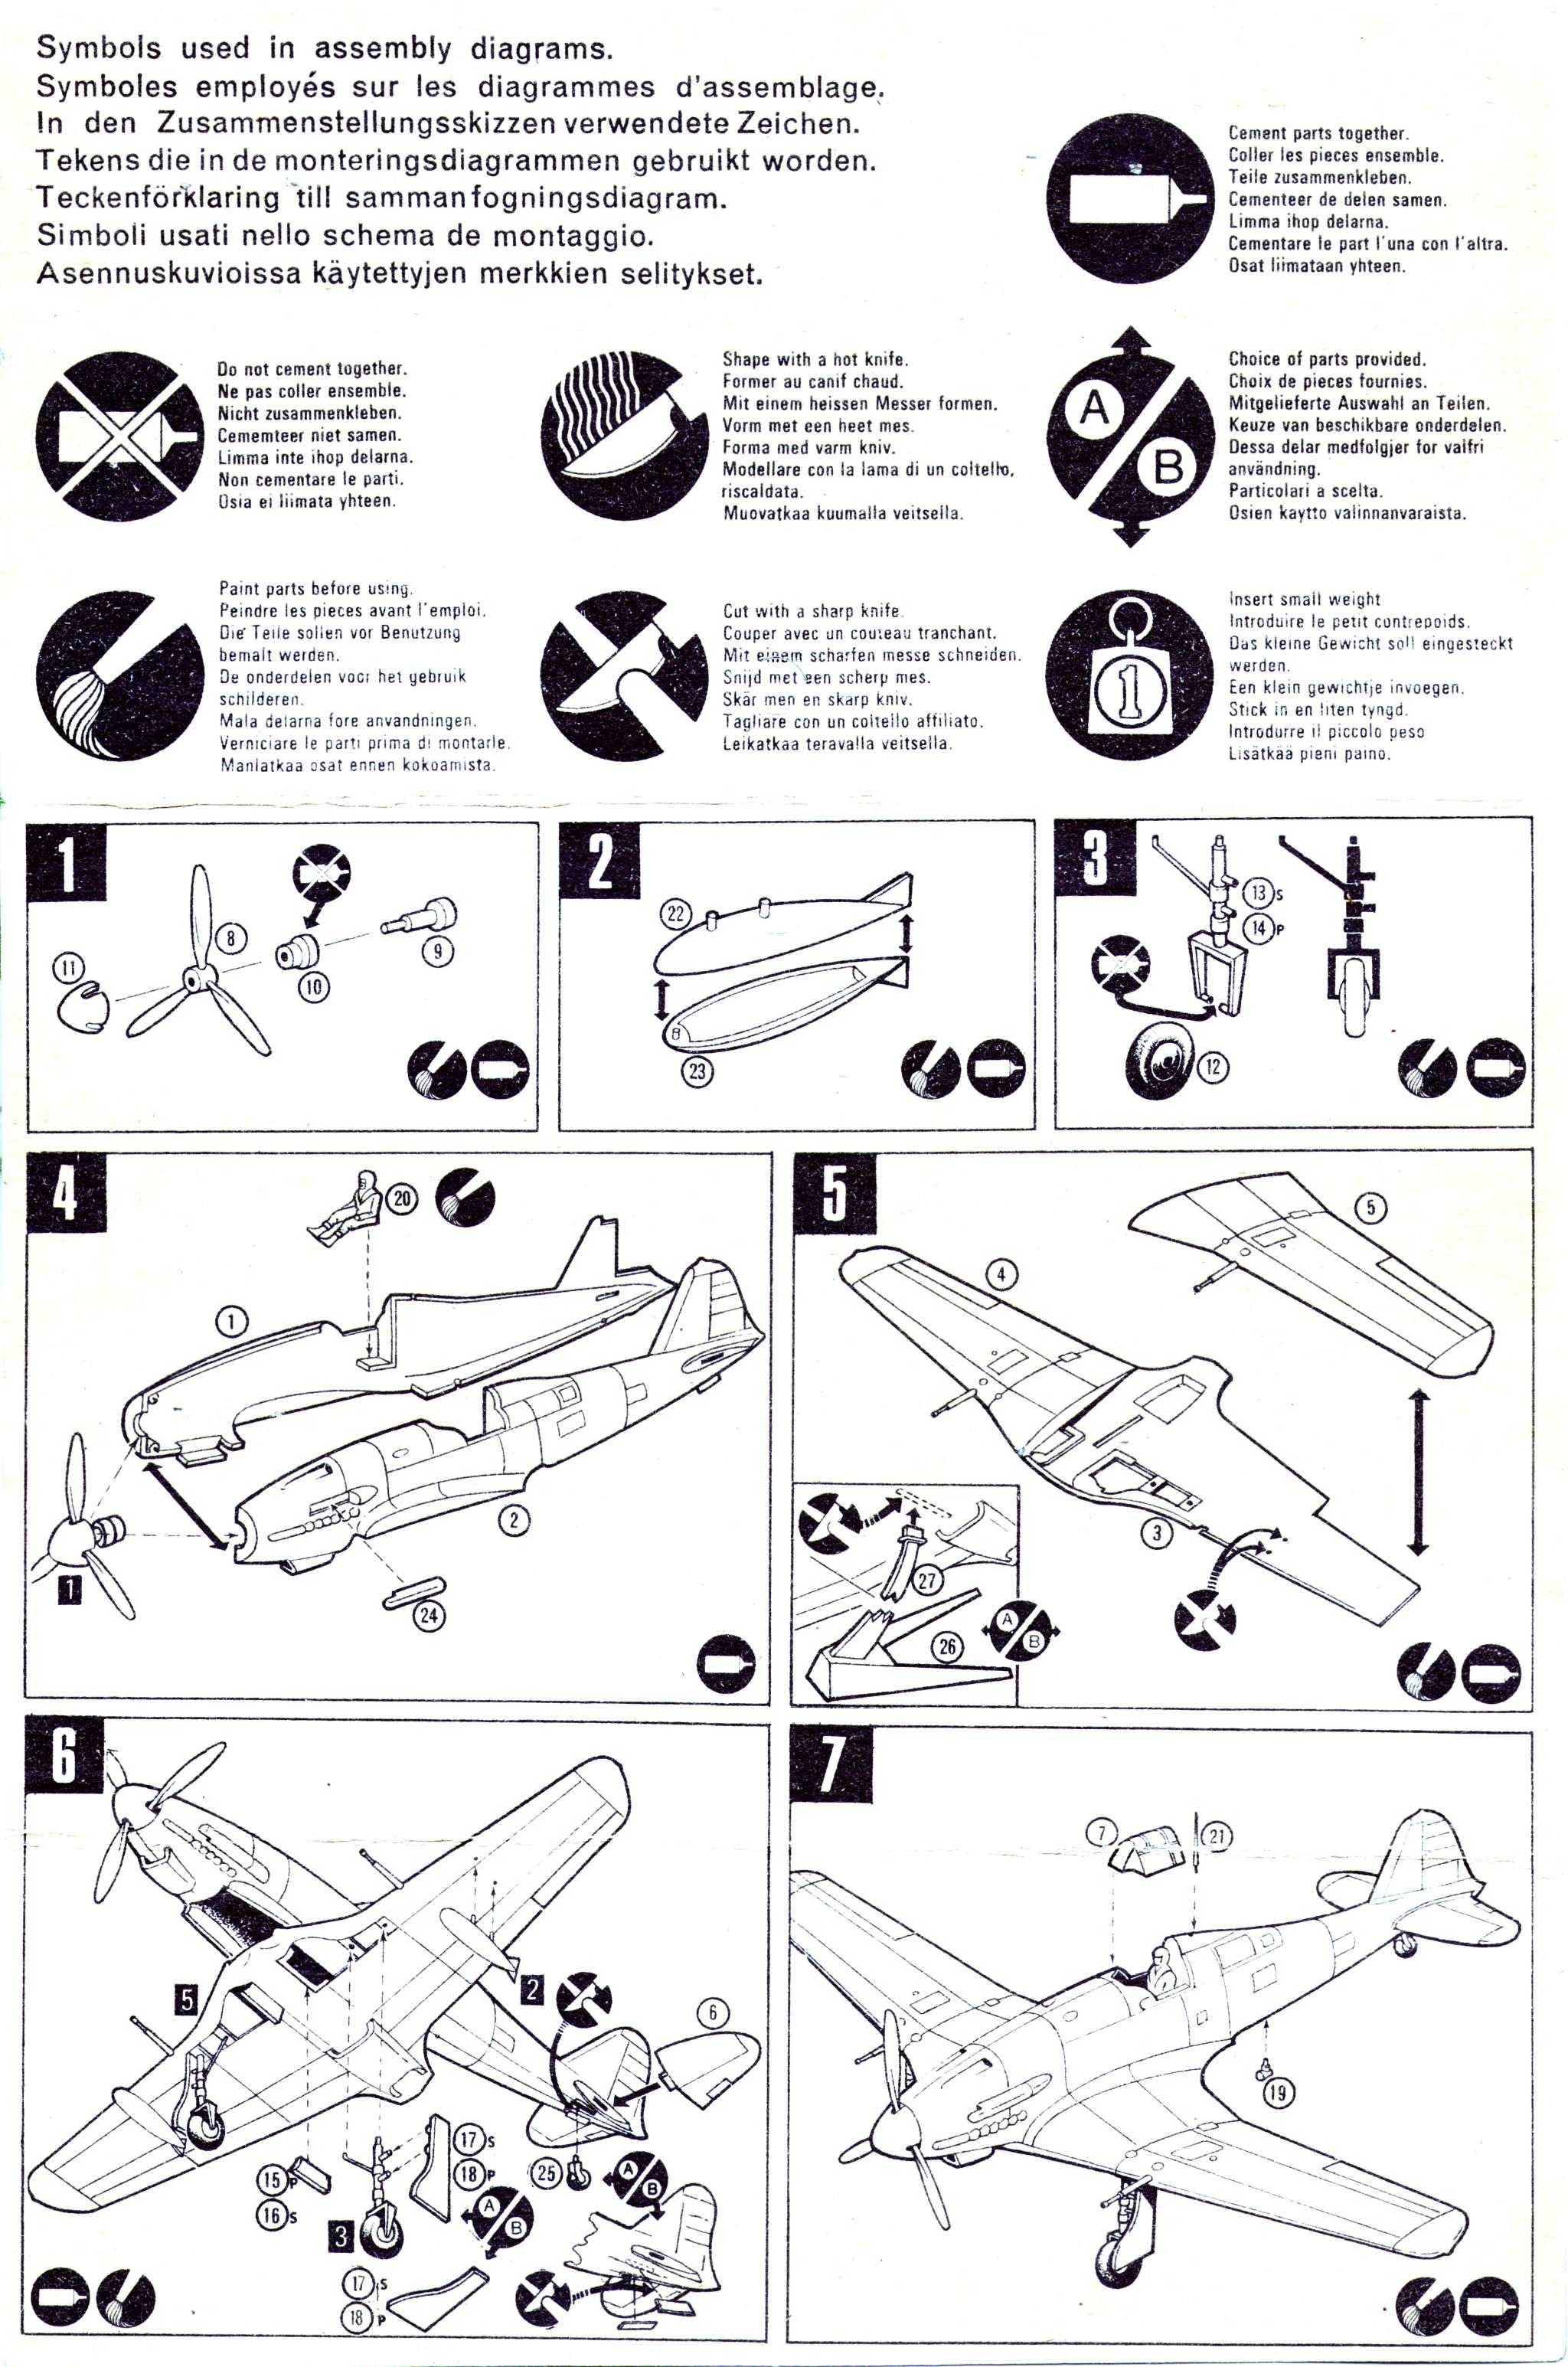 Assembly instruction FROG F216F Fiat G.55 Single-seat fighter, Rovex limited; 1973-1974